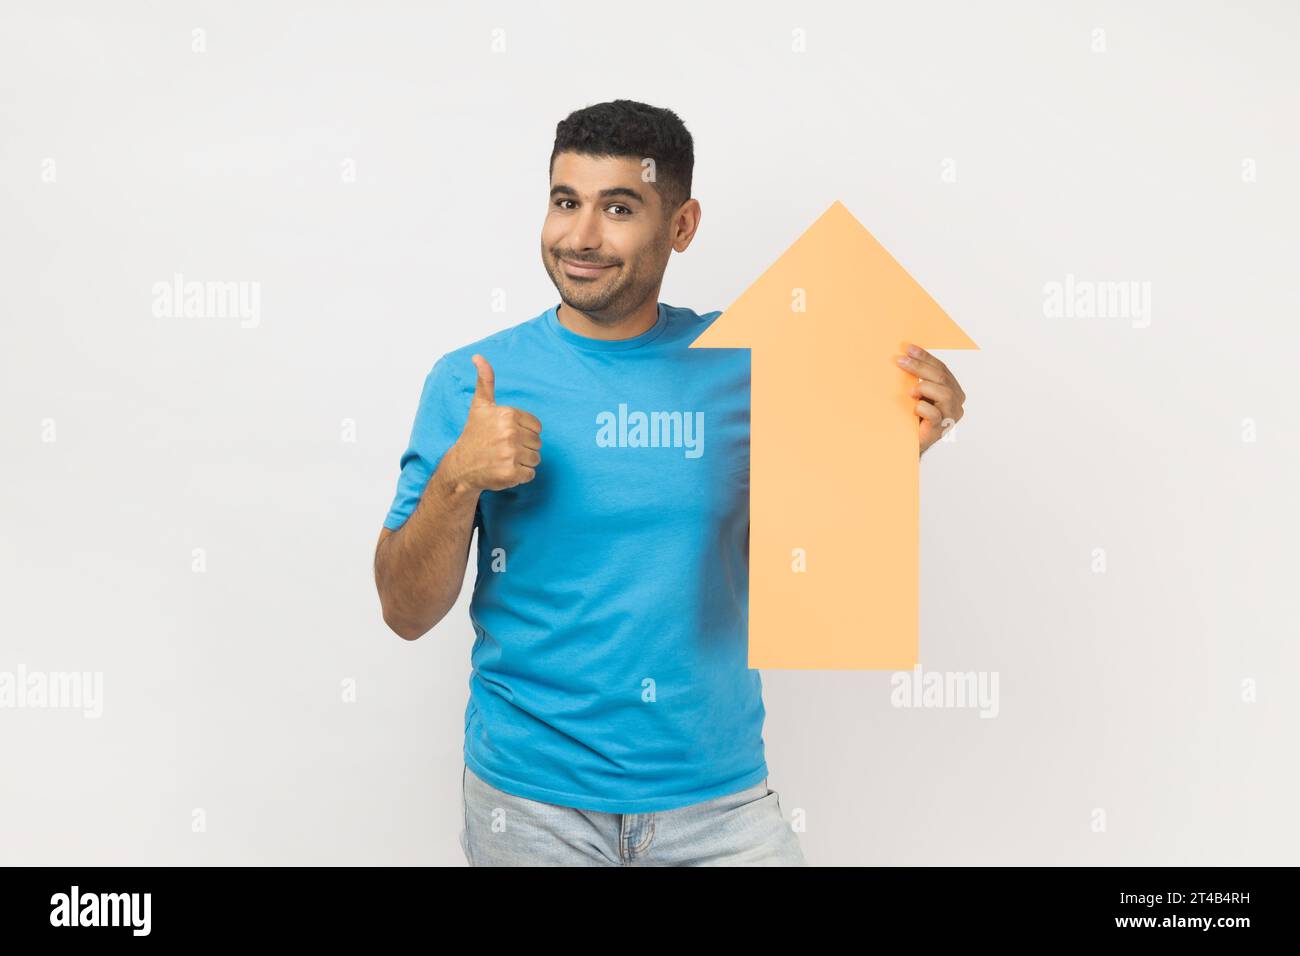 Portrait of delighted unshaven man wearing blue T- shirt standing holding carton arrow indicating up, being glad of career success, showing thumb up. Indoor studio shot isolated on gray background. Stock Photo